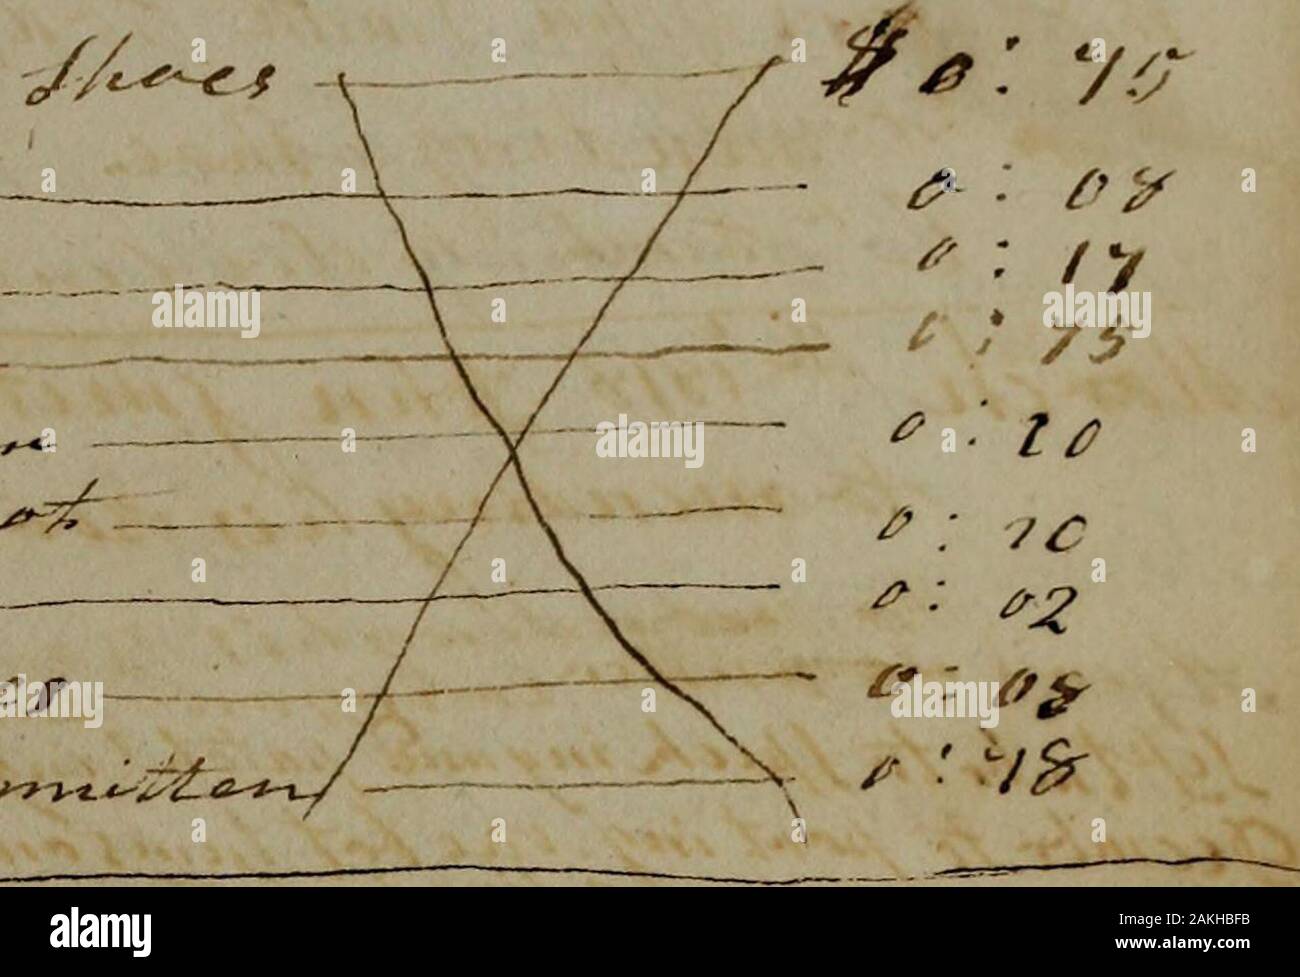 [Smith family account book : agriculture and cottage industry] [manuscript], 1806-1831 . y//y /^^ ^^ /^/v .£..... U fj.^.^ ^ ;^^^.^.^A..i/A: ?-€^ 0^ ^^i^/^cr*^^ /ctf^^./^^S -//c^^j. ^^-j-^.^-i^i^^--*-!-/ — Stock Photo